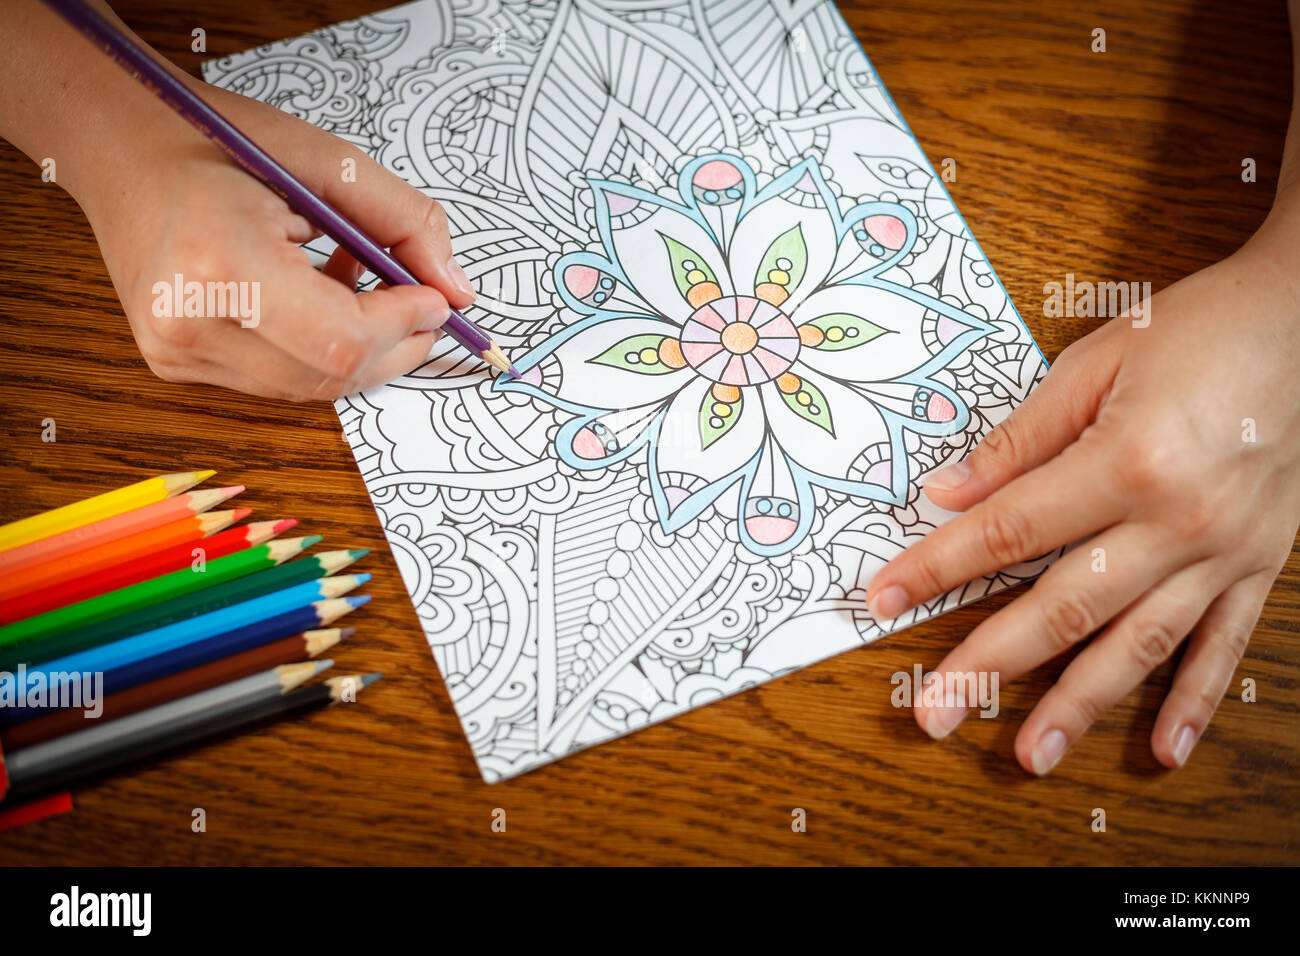 Adult Coloring Book Stock Photo Alamy